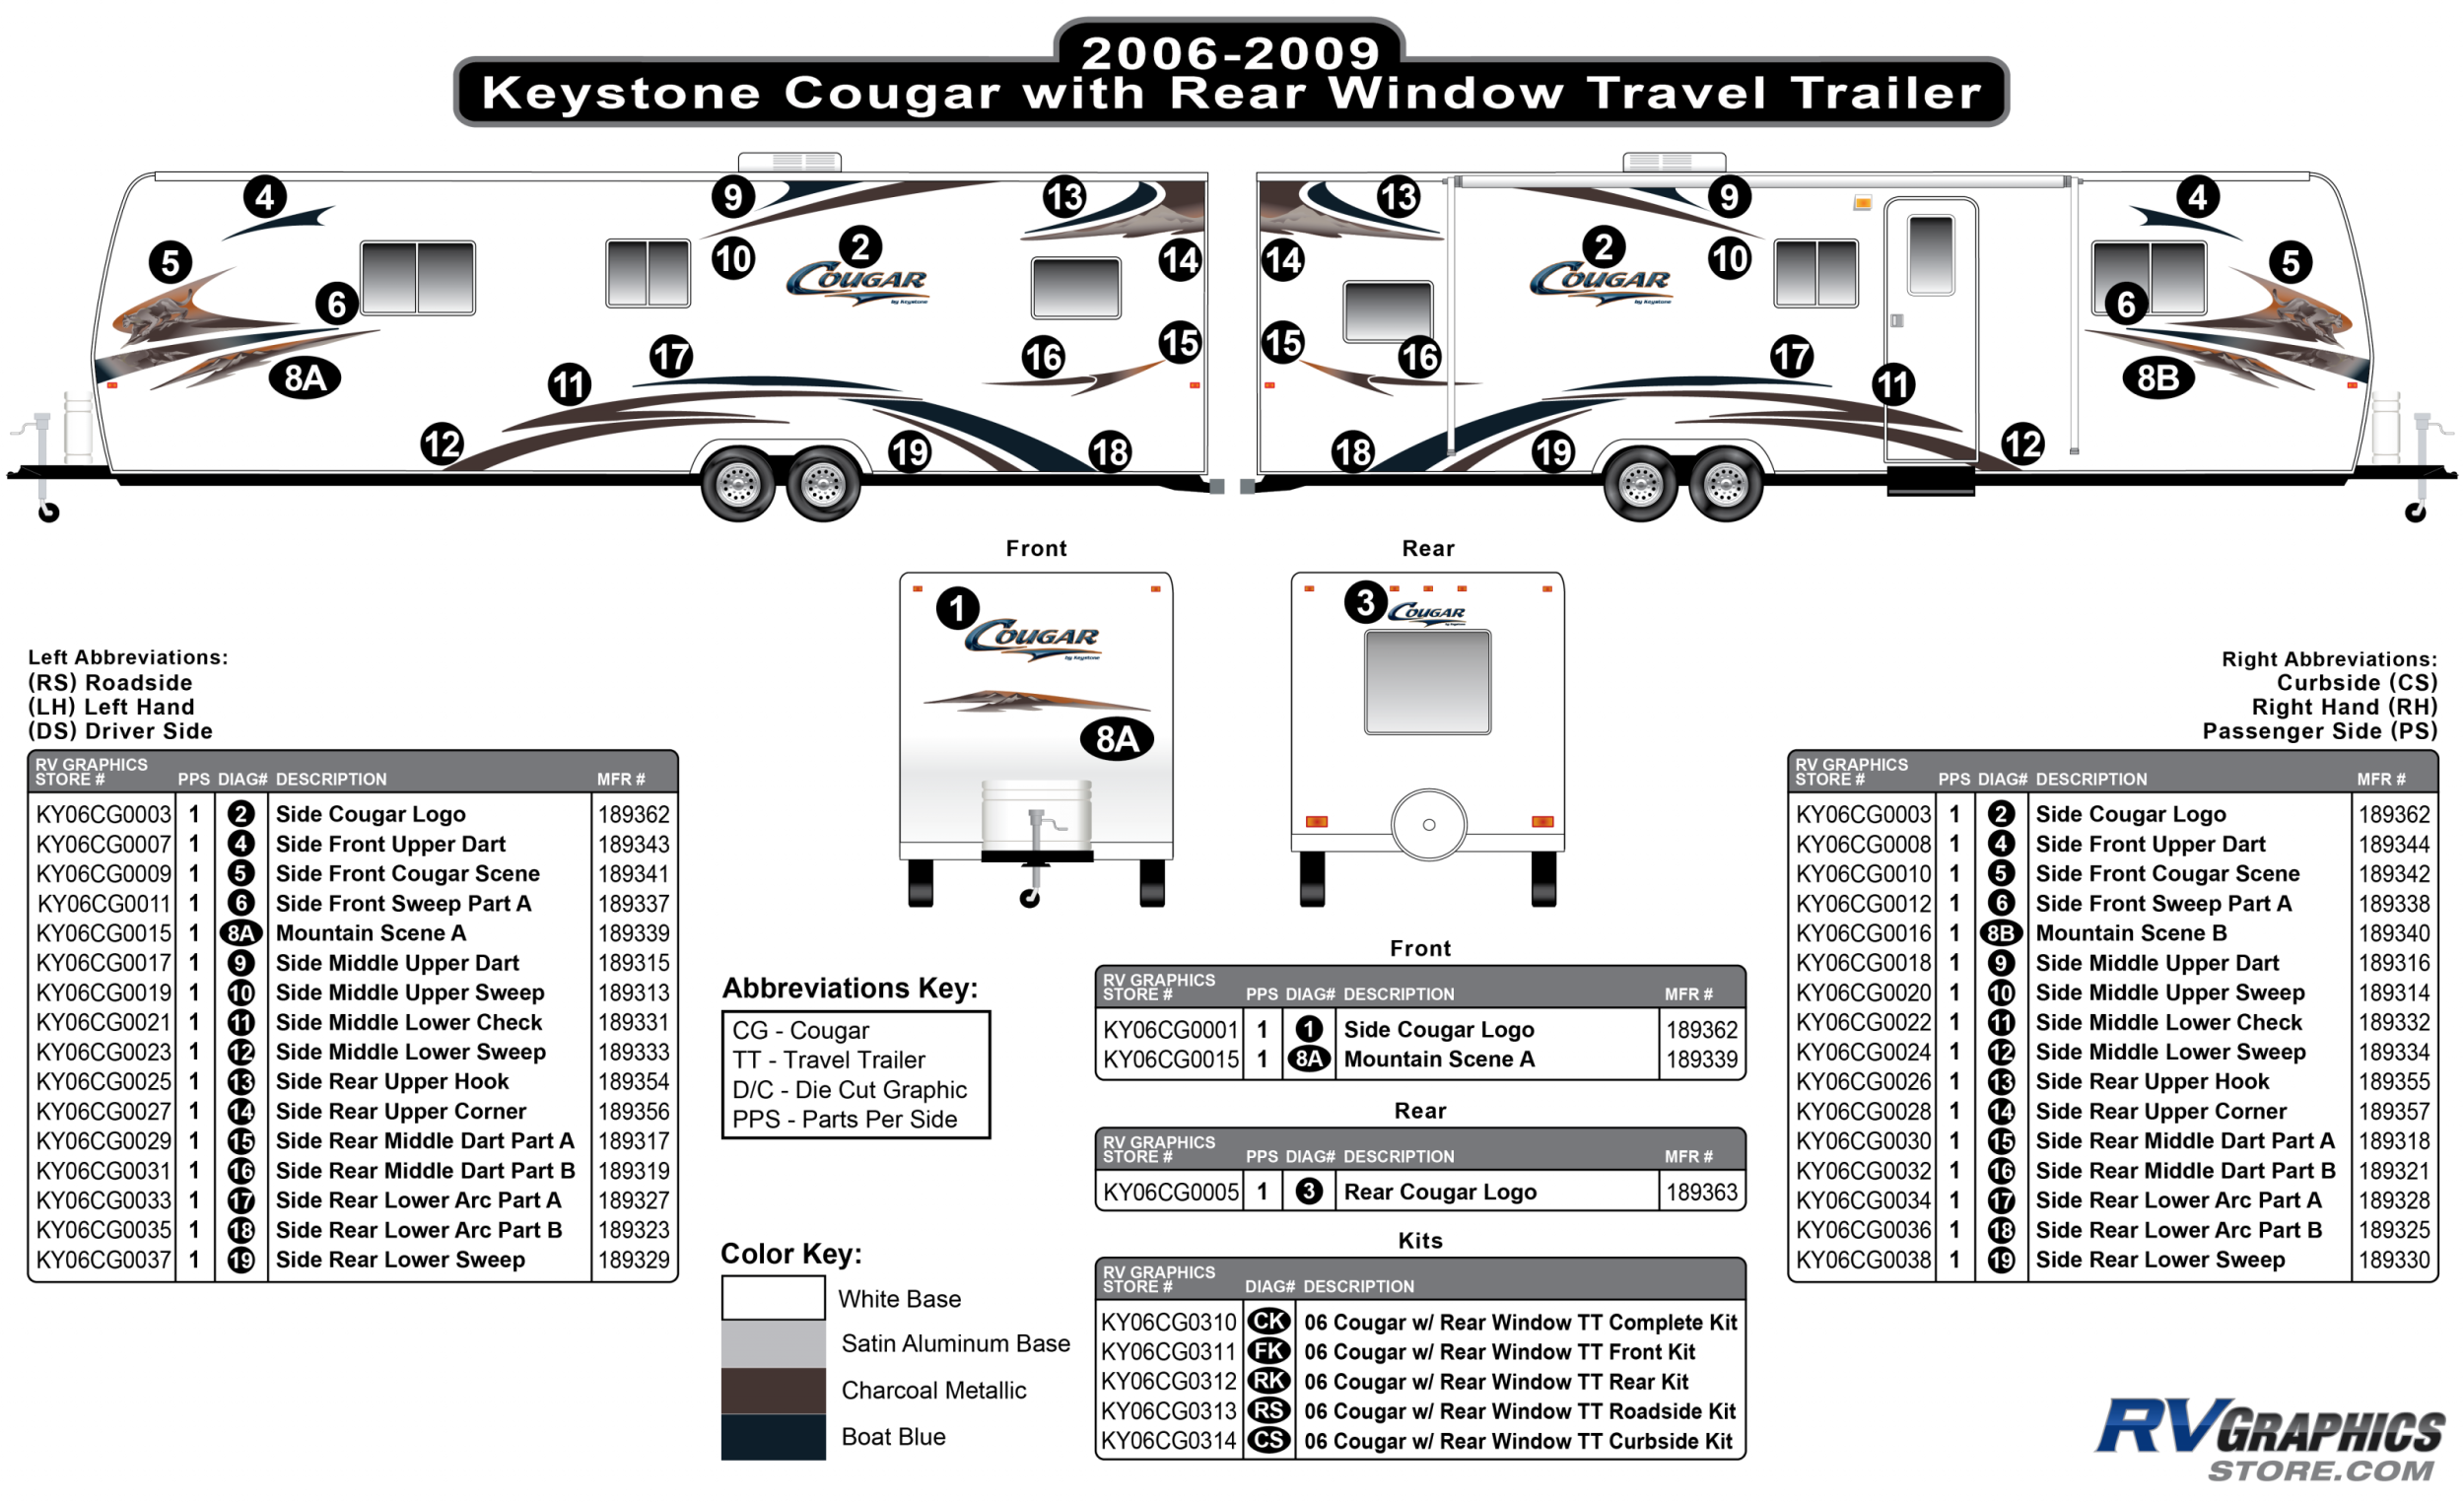 Cougar - 2006-2008 Cougar TT-Travel Trailer OEM Colors with Rear Window